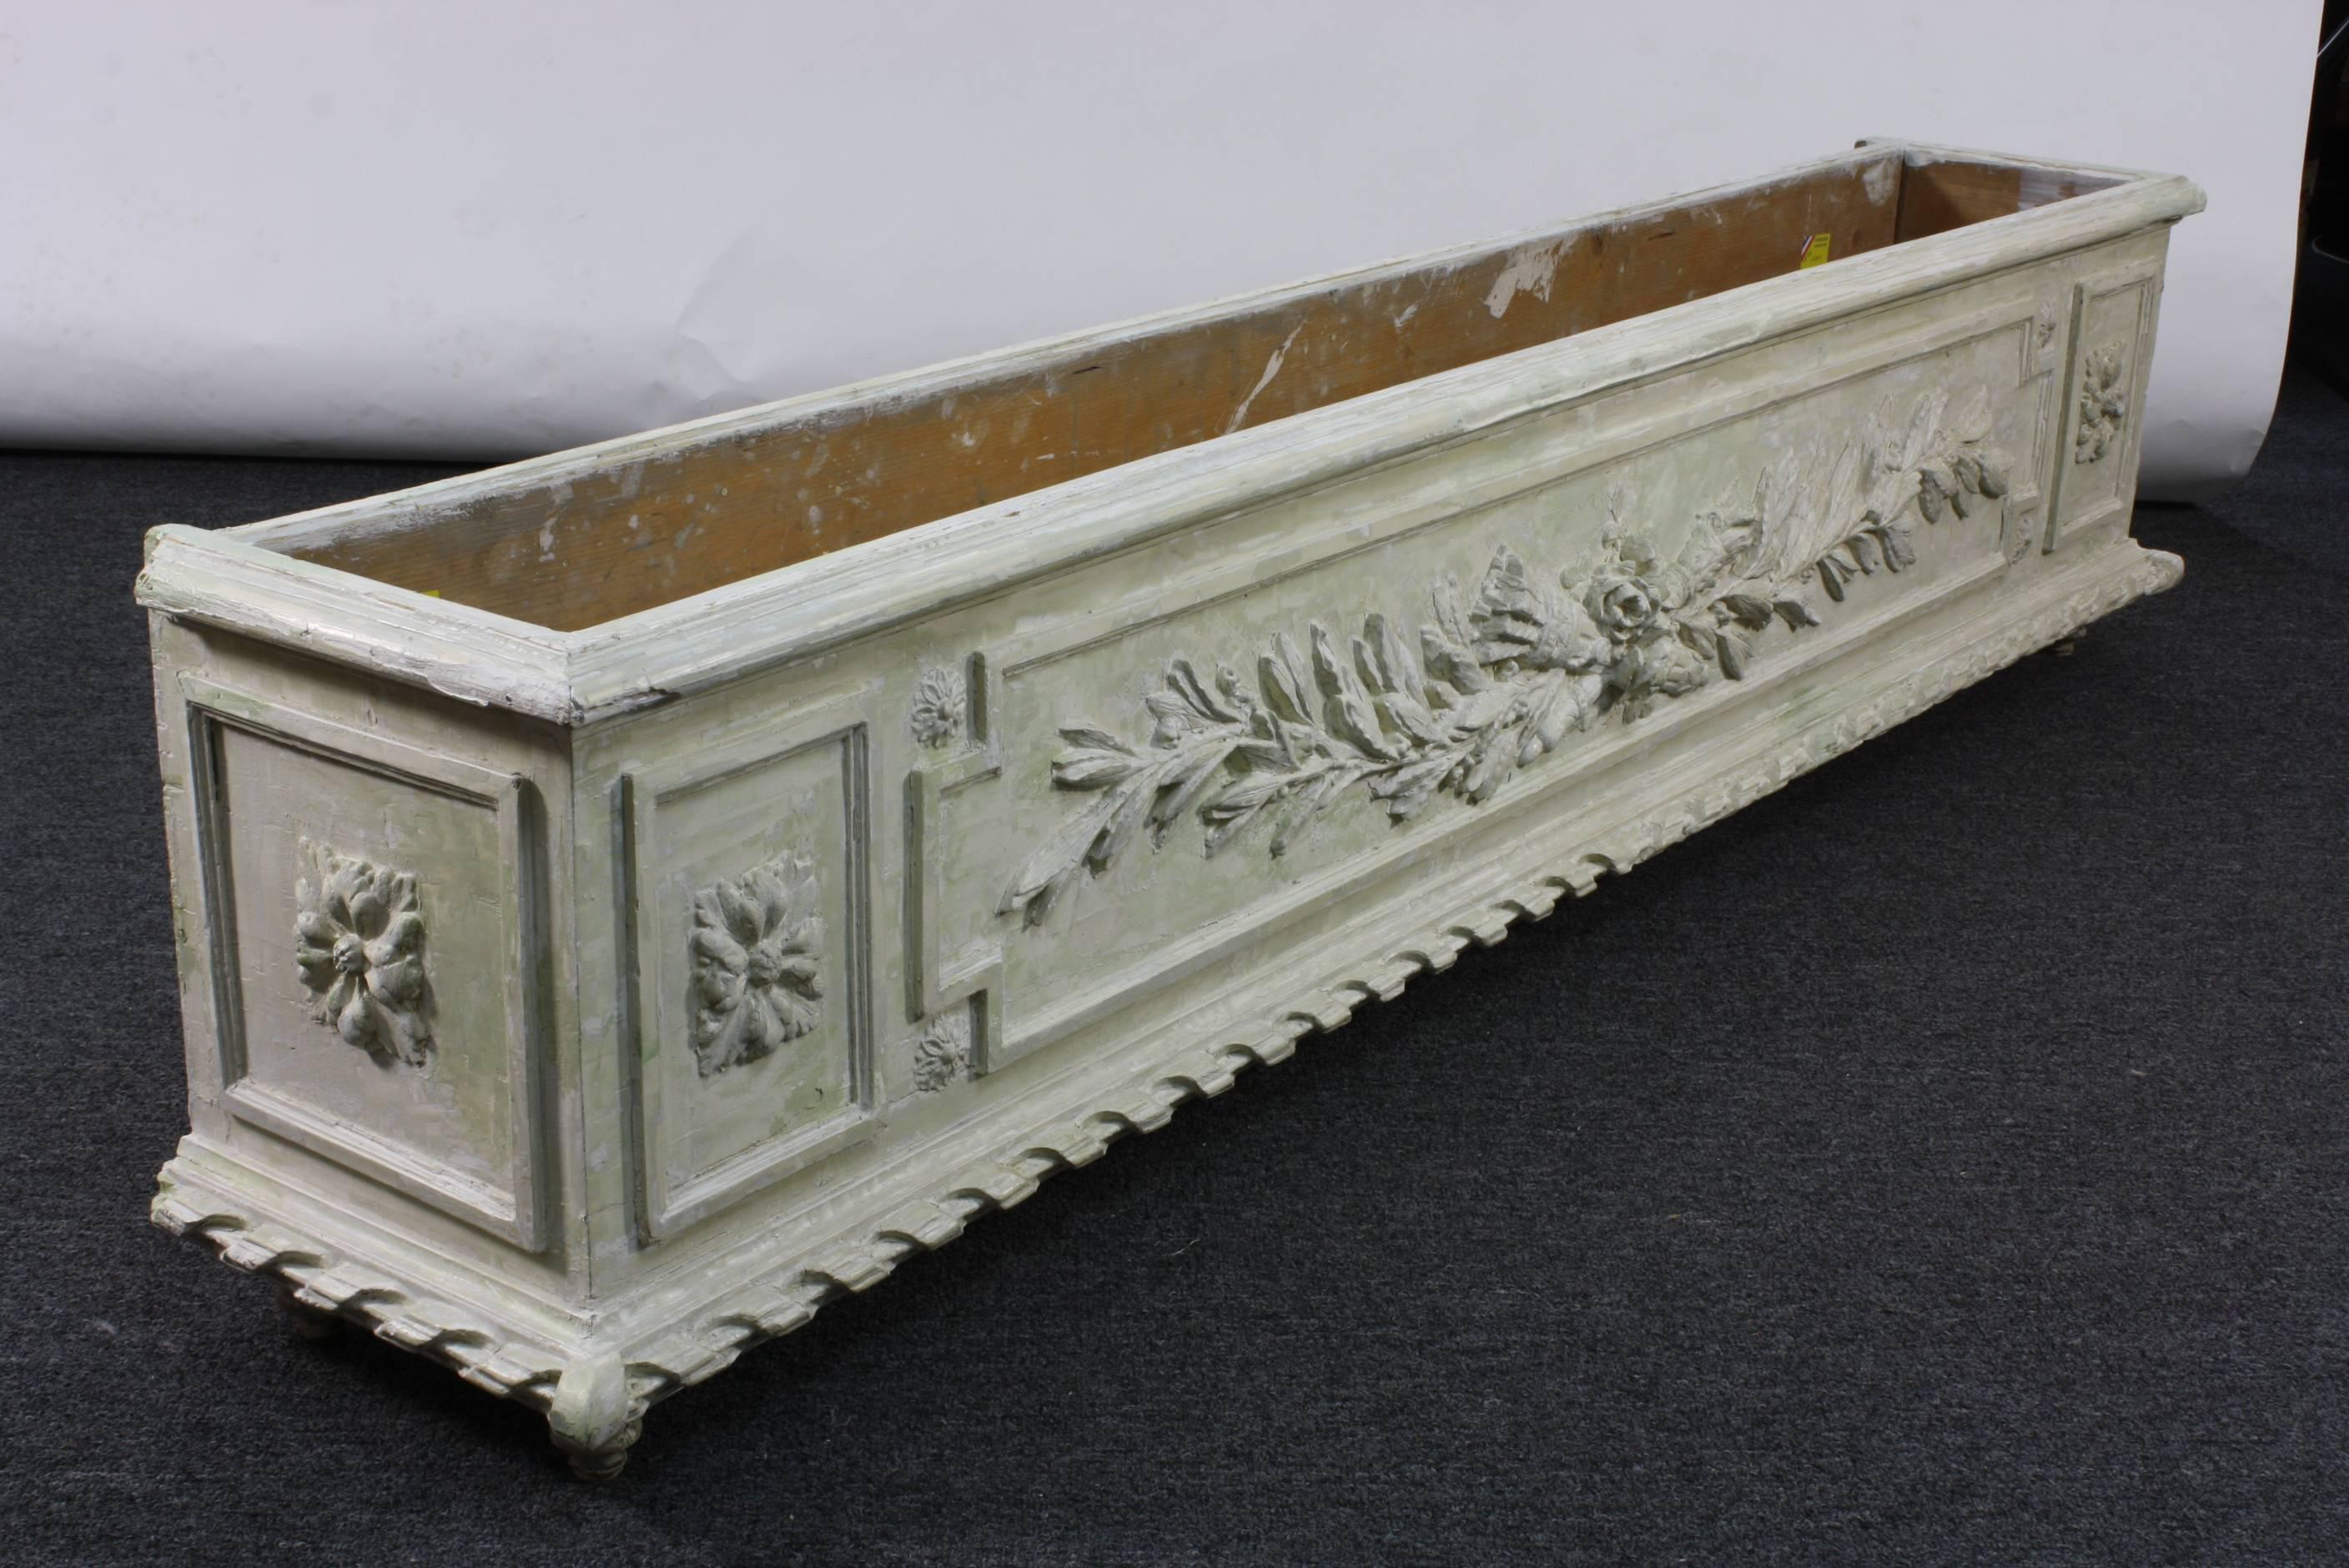 An unusually large, and deeply sculpted and painted wood planter or jardinière, in the Louis XVI style (late 19th century). The planter appears to have been stripped of some coats of paint, down to its originally grey-green paint and white gesso.